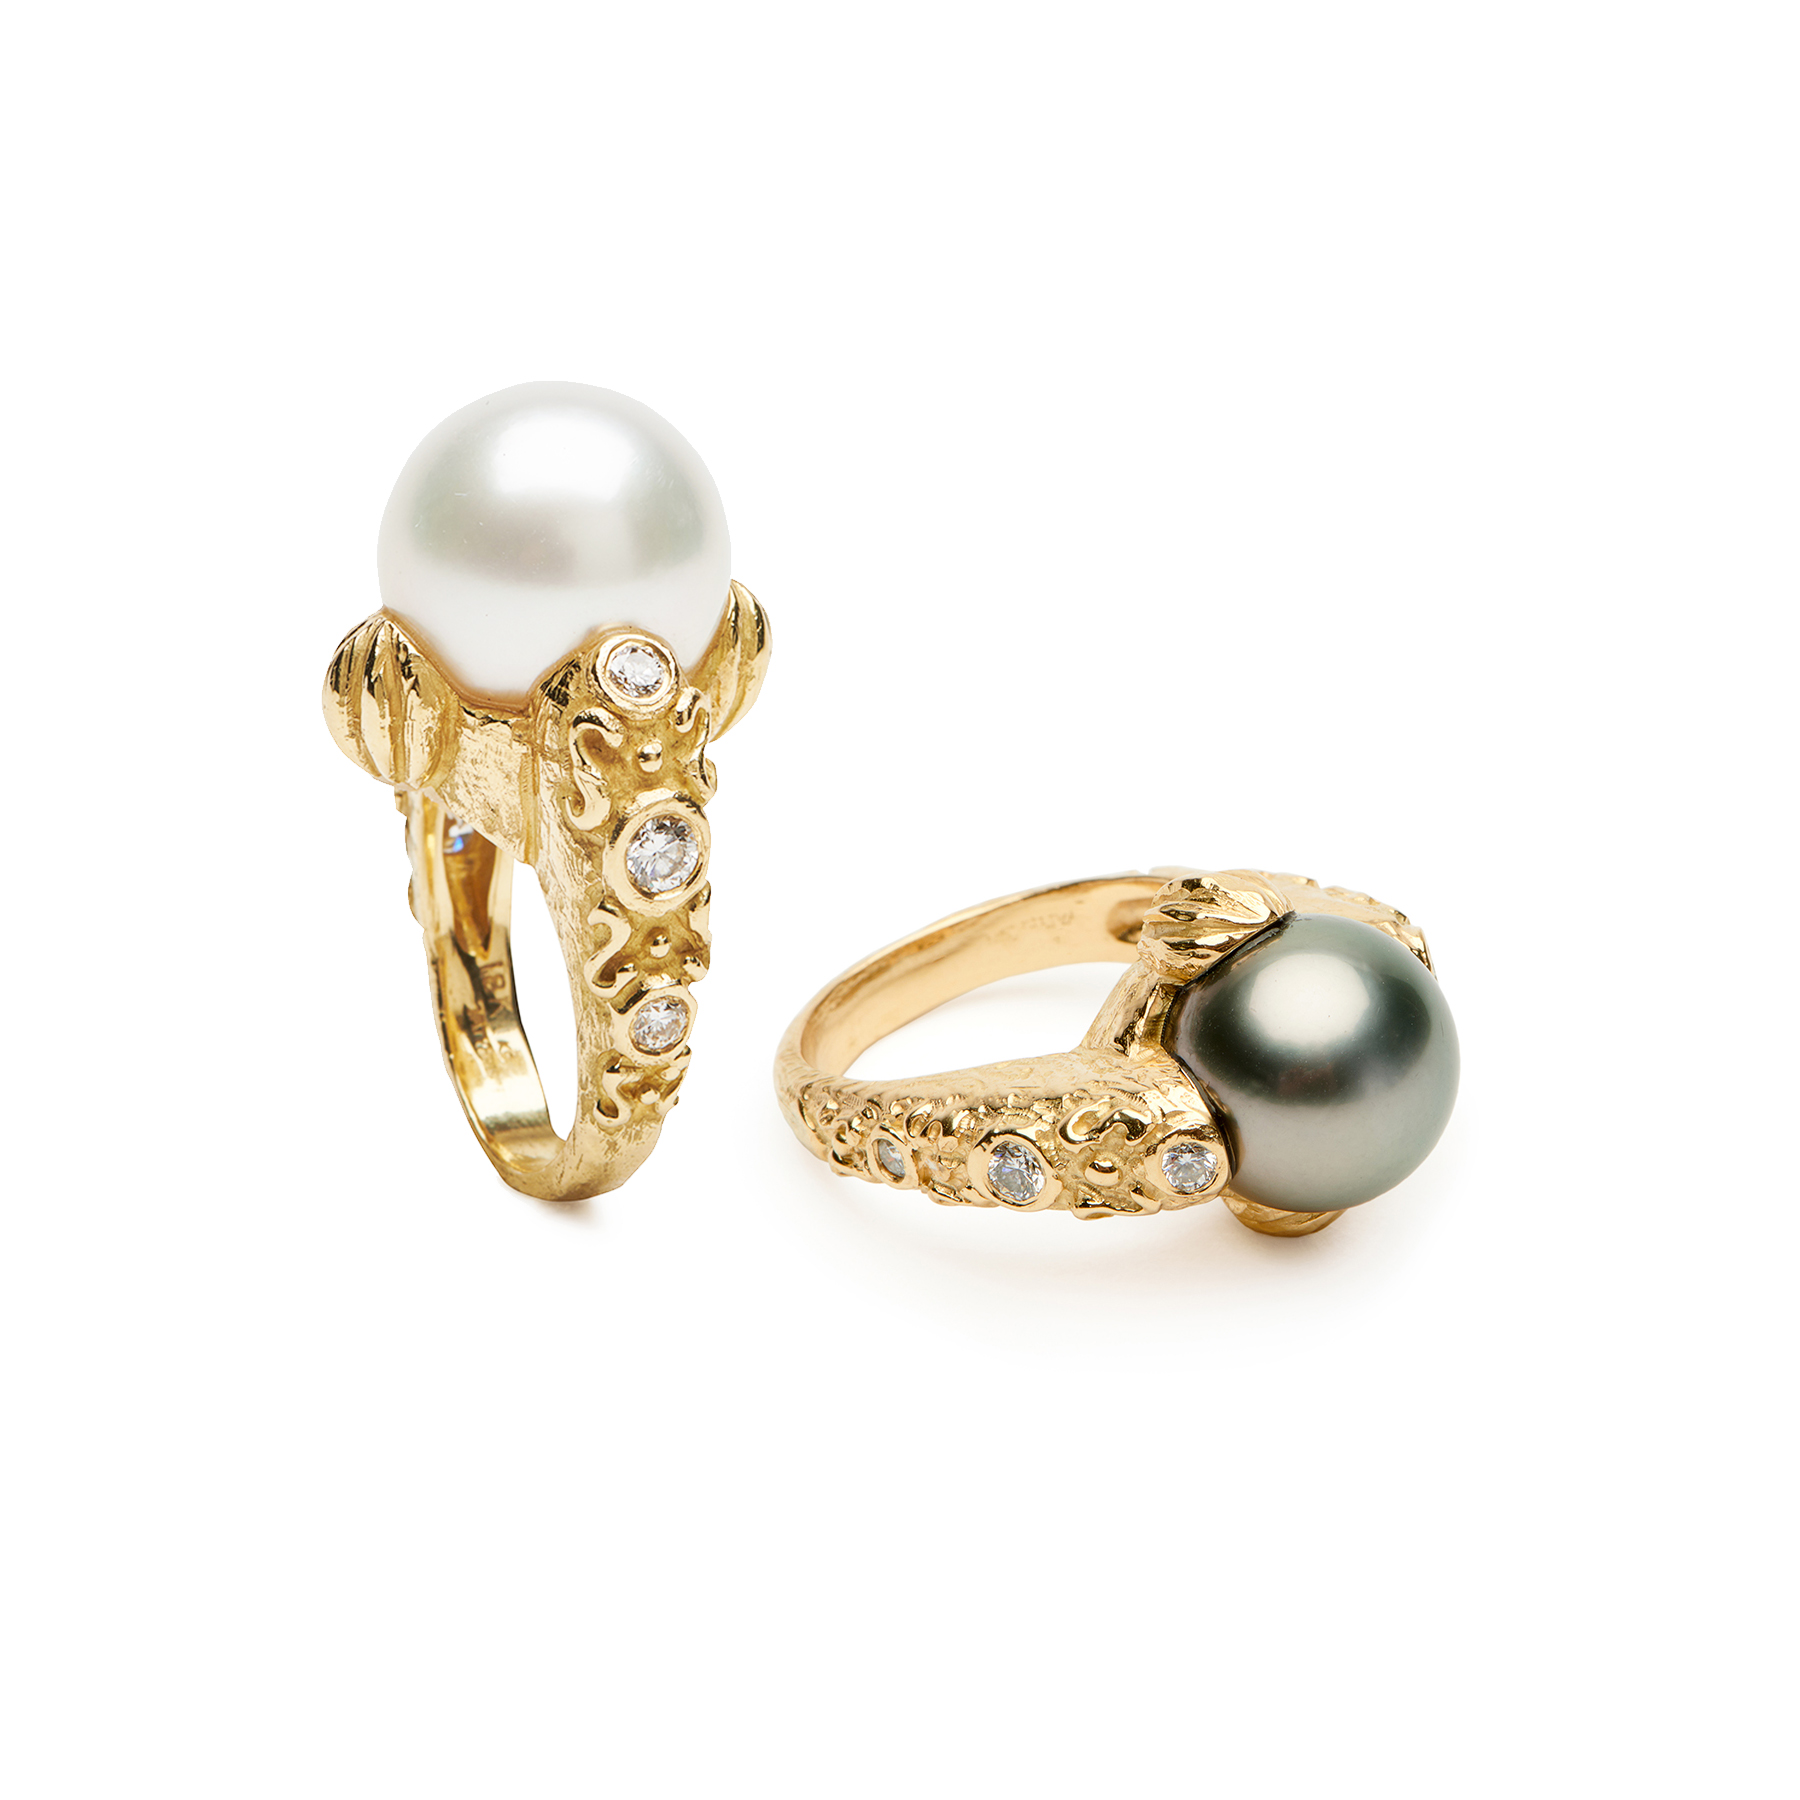 "Mimi" Rings with South Sea and Tahtitian Pearls & Diamonds